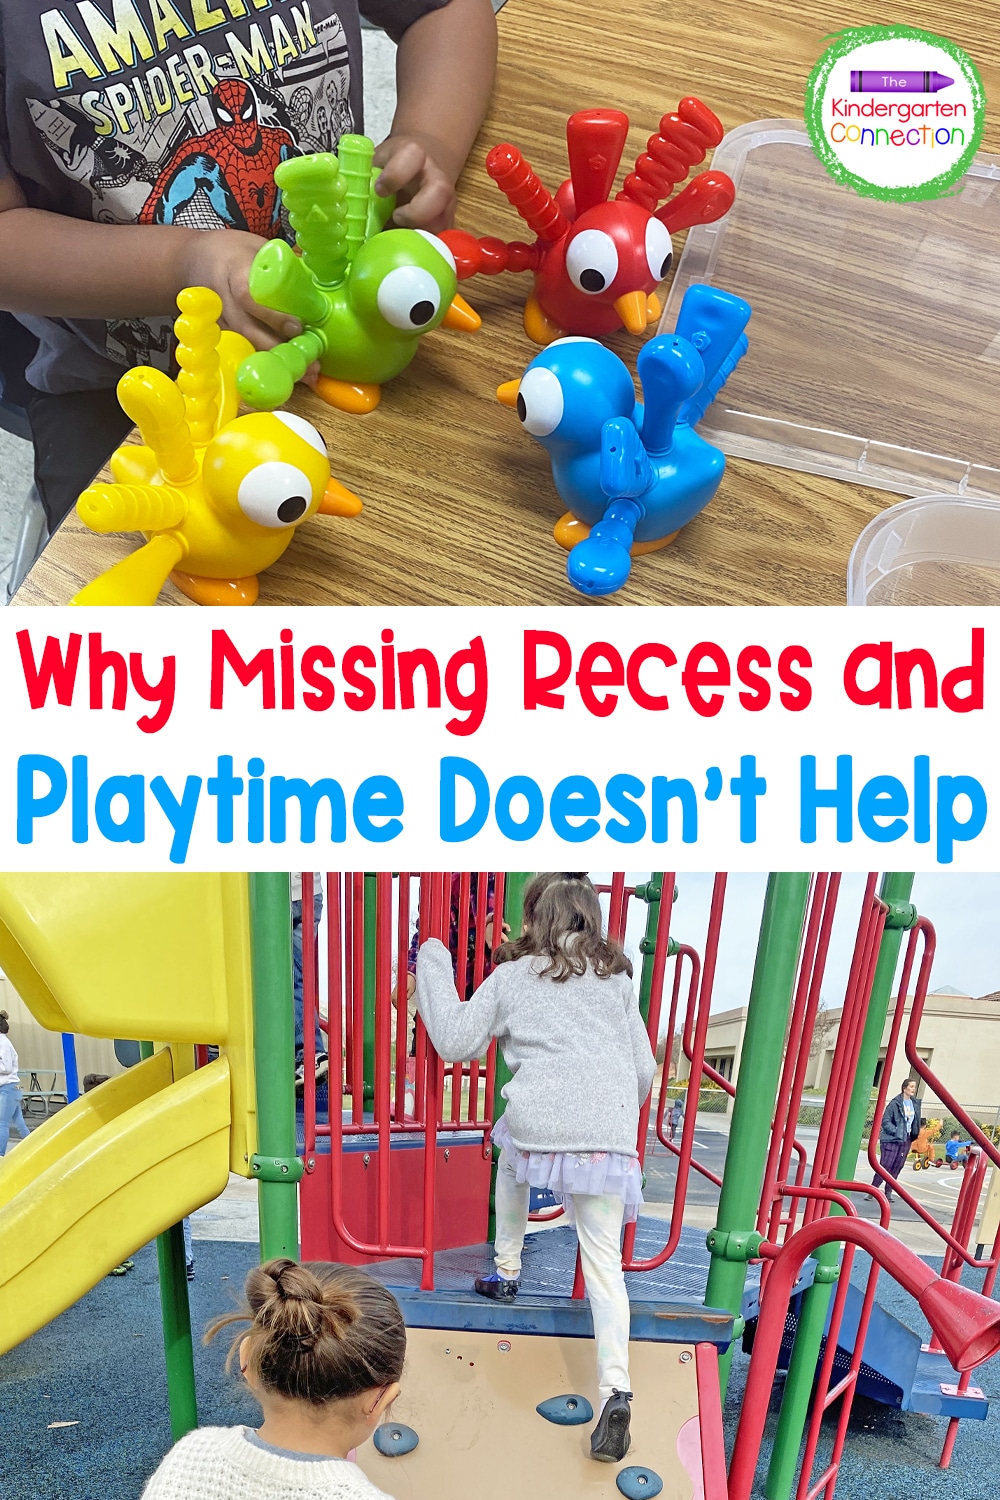 Why Missing Playtime and Recess Time Doesn\'t Help